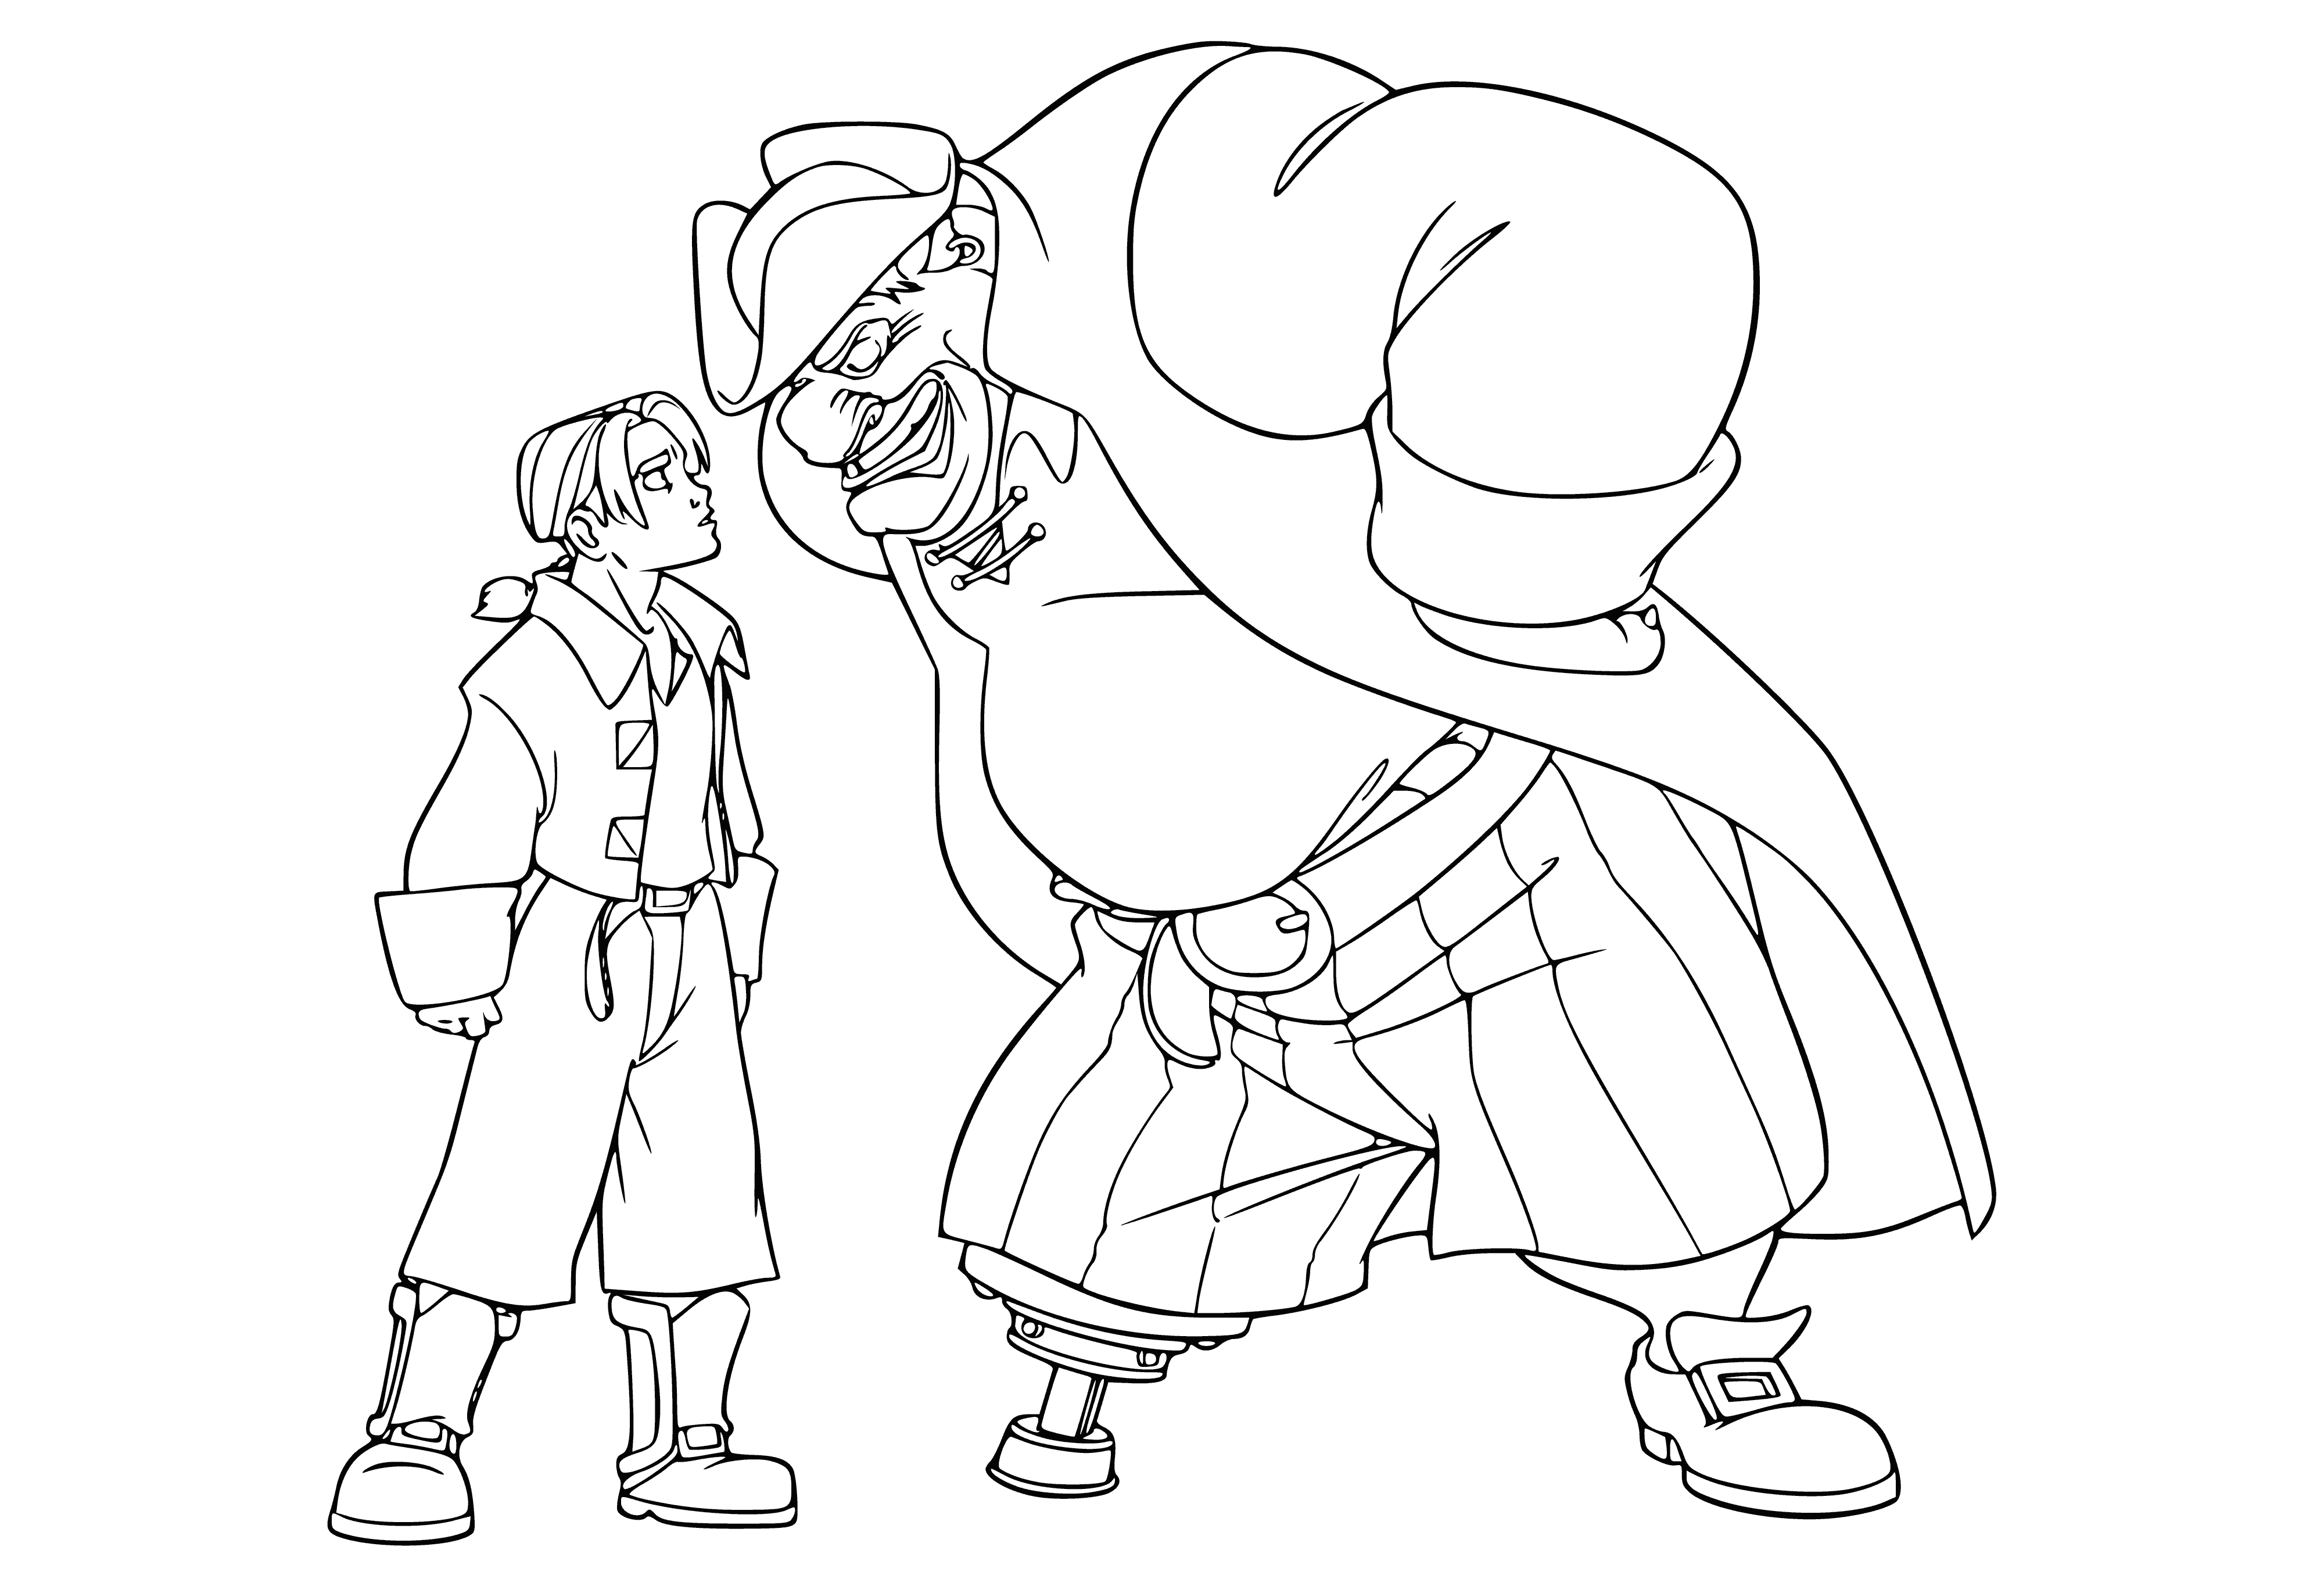 Jim and Silver coloring page